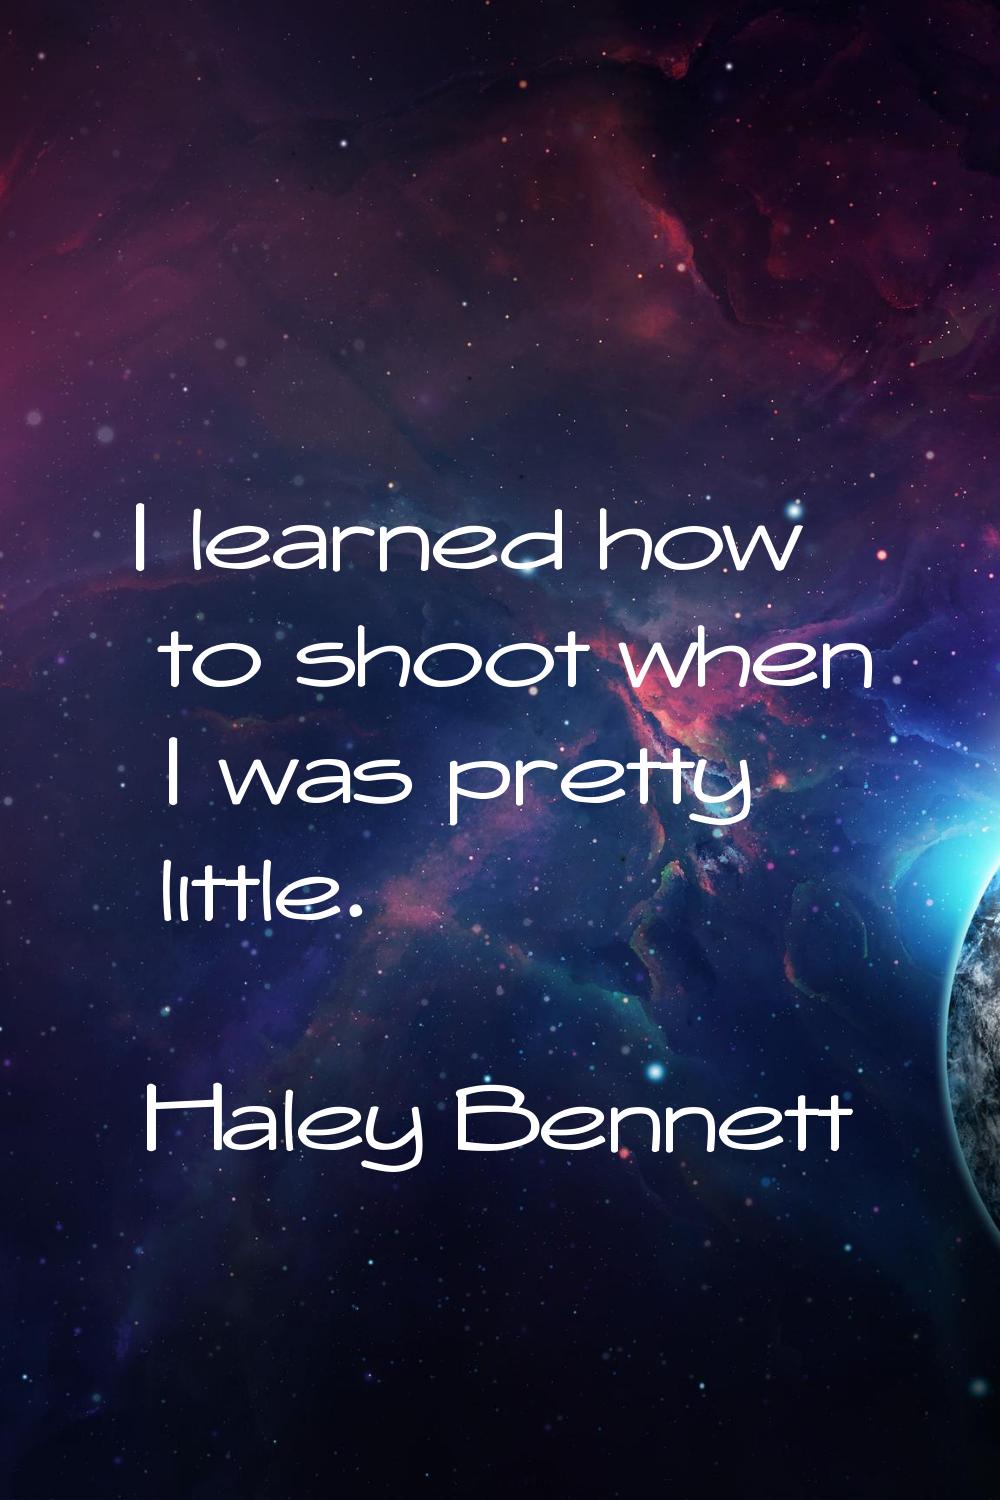 I learned how to shoot when I was pretty little.